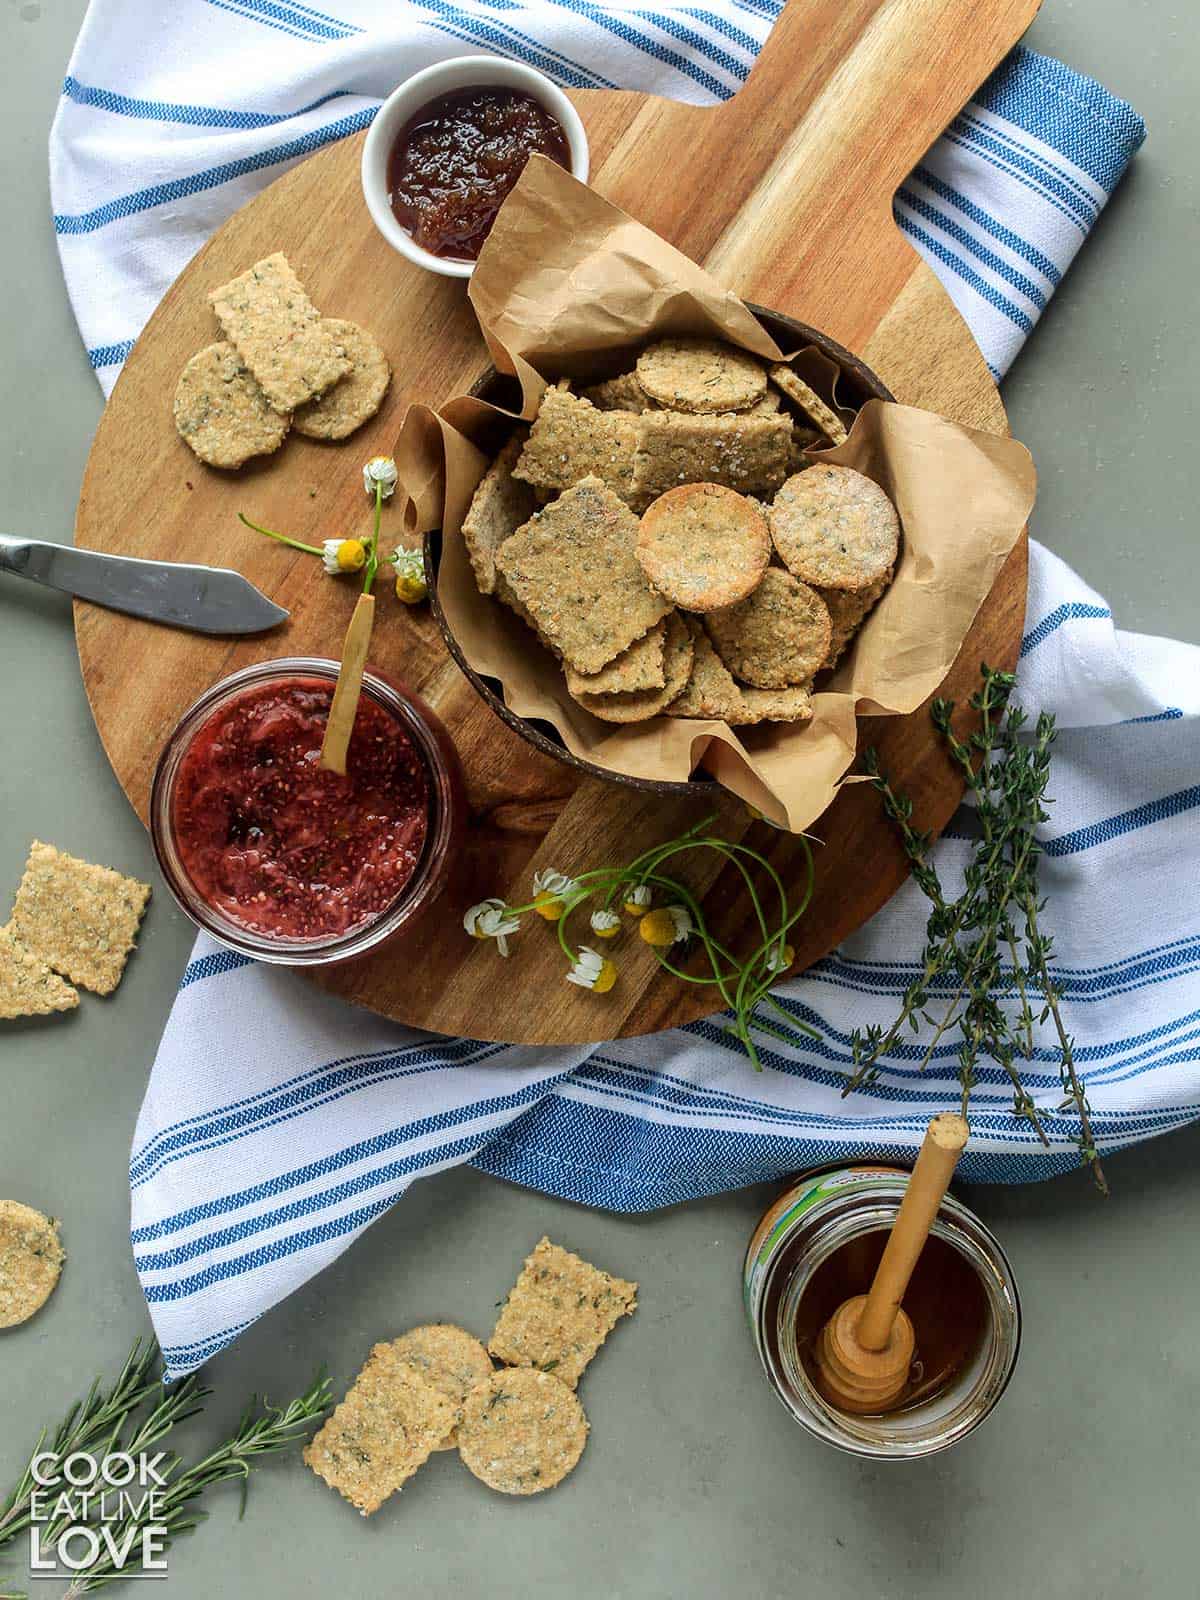 Bowl of soy crackers are garnished with sprig of rosemary and set on burlap scattered with dried soybeans.